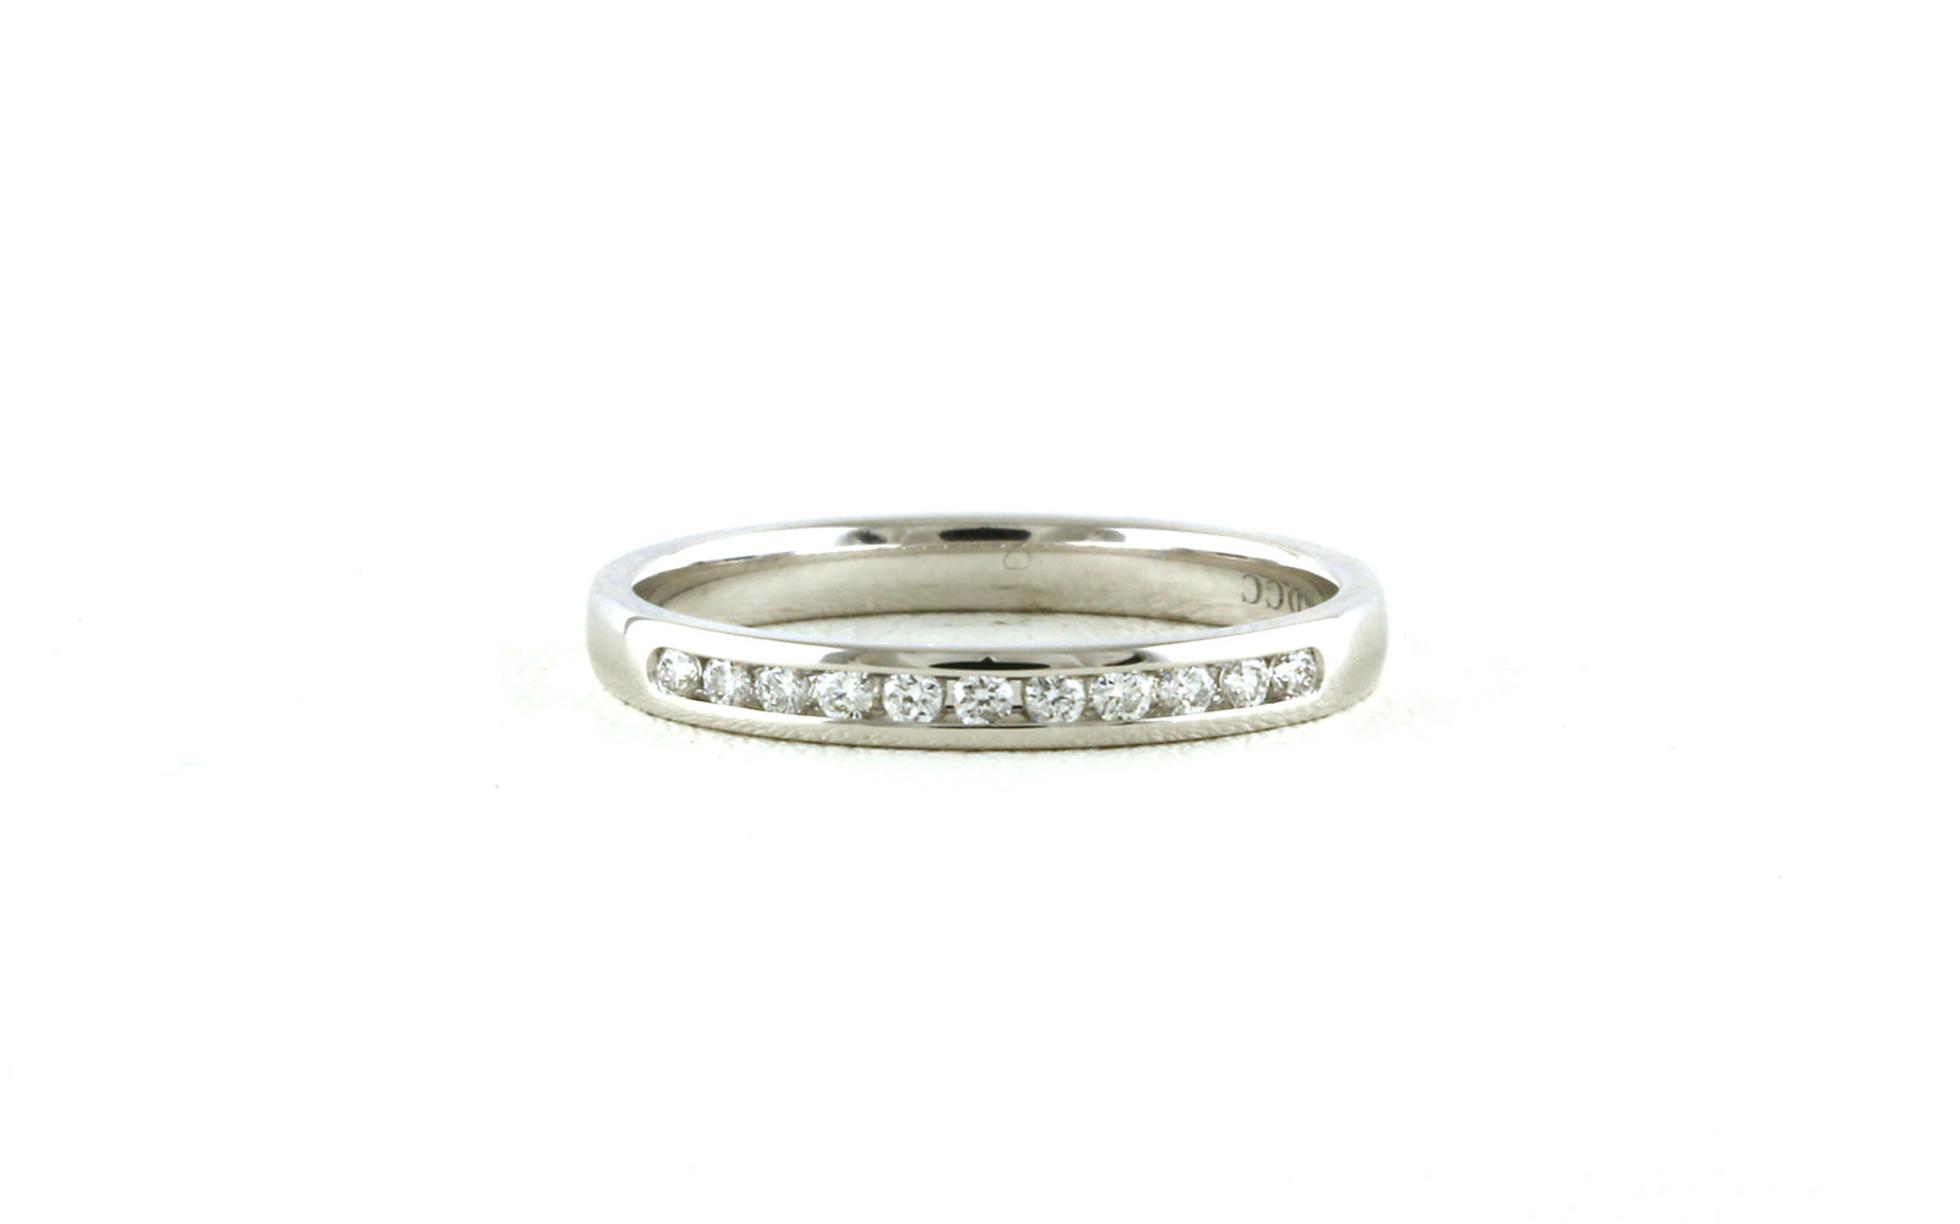 11-Stone Channel-set Wedding Band with Diamonds in White Gold (0.14cts TWT)